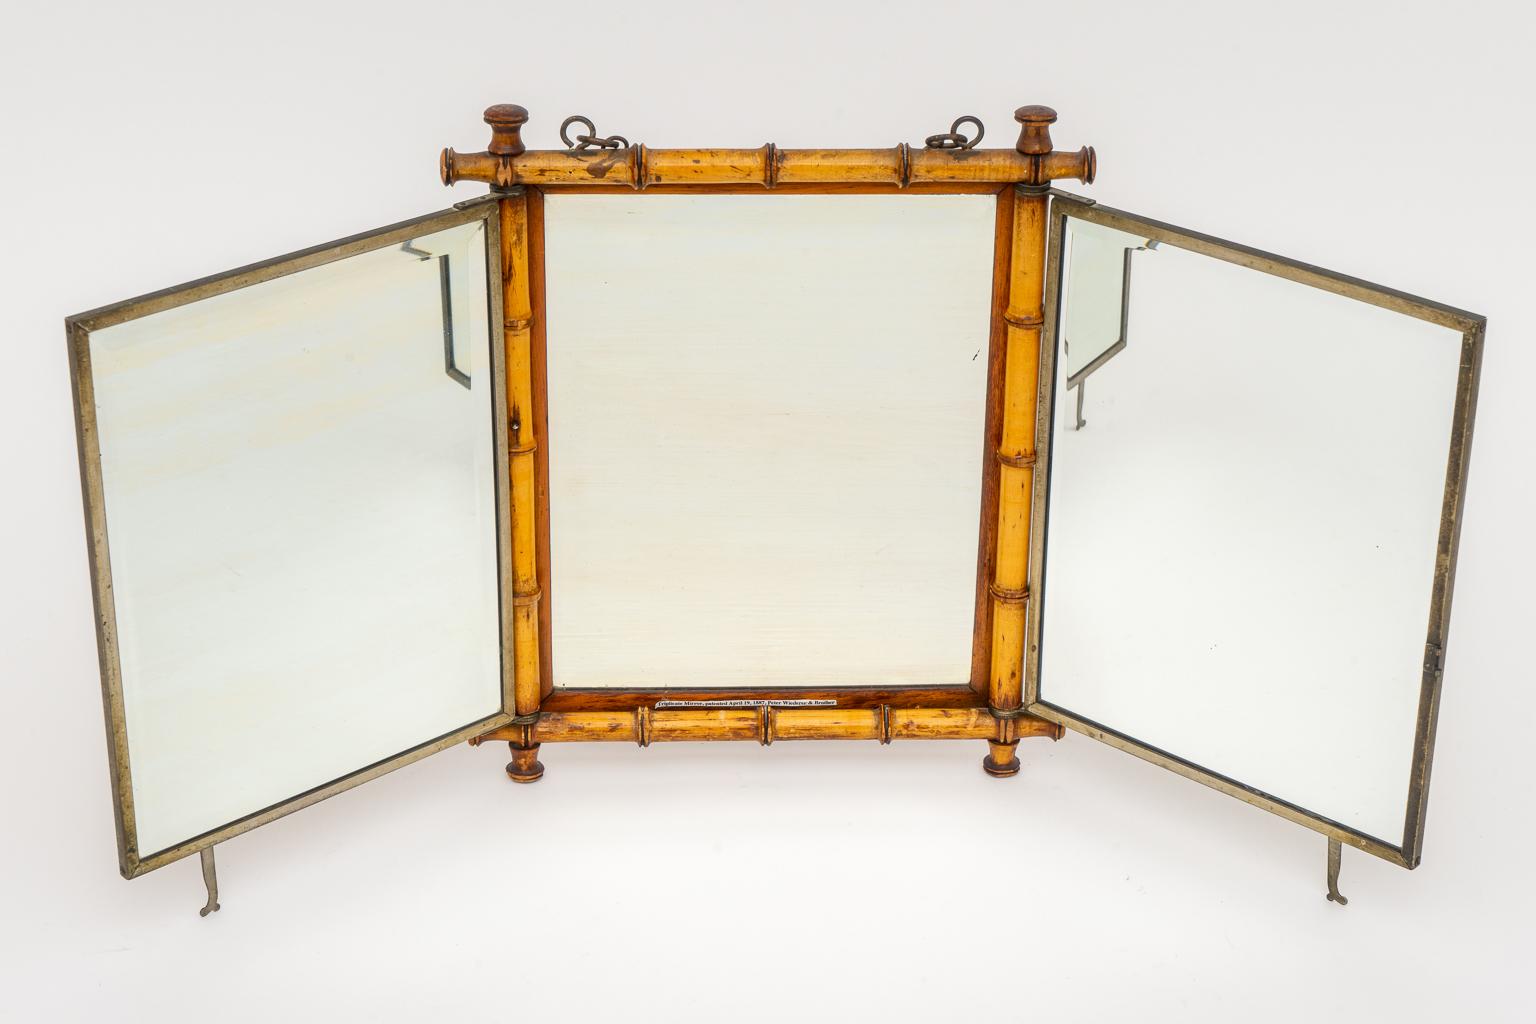 This stylish and chic Aesthetic period faux (wood) bamboo trifold beveled mirror dates to 1887 and was created by Peter Wiederer & Brothers. The piece can be hung on the wall or could sit on a vanity or shaving table. The backside is detailed with